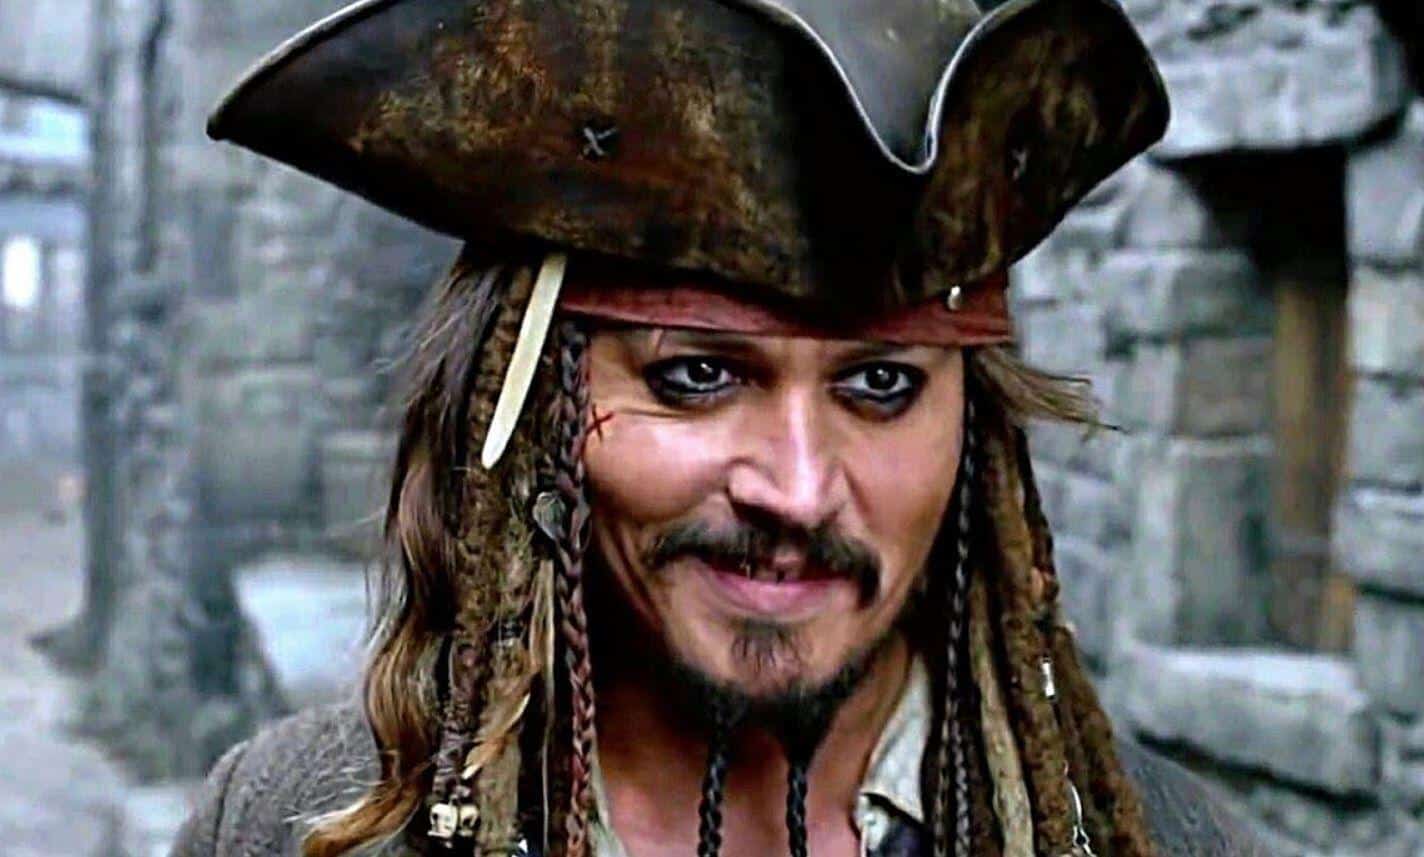 Petition Started For Disney To Bring Back Johnny Depp For Next 'Pirates Of The ...1424 x 857